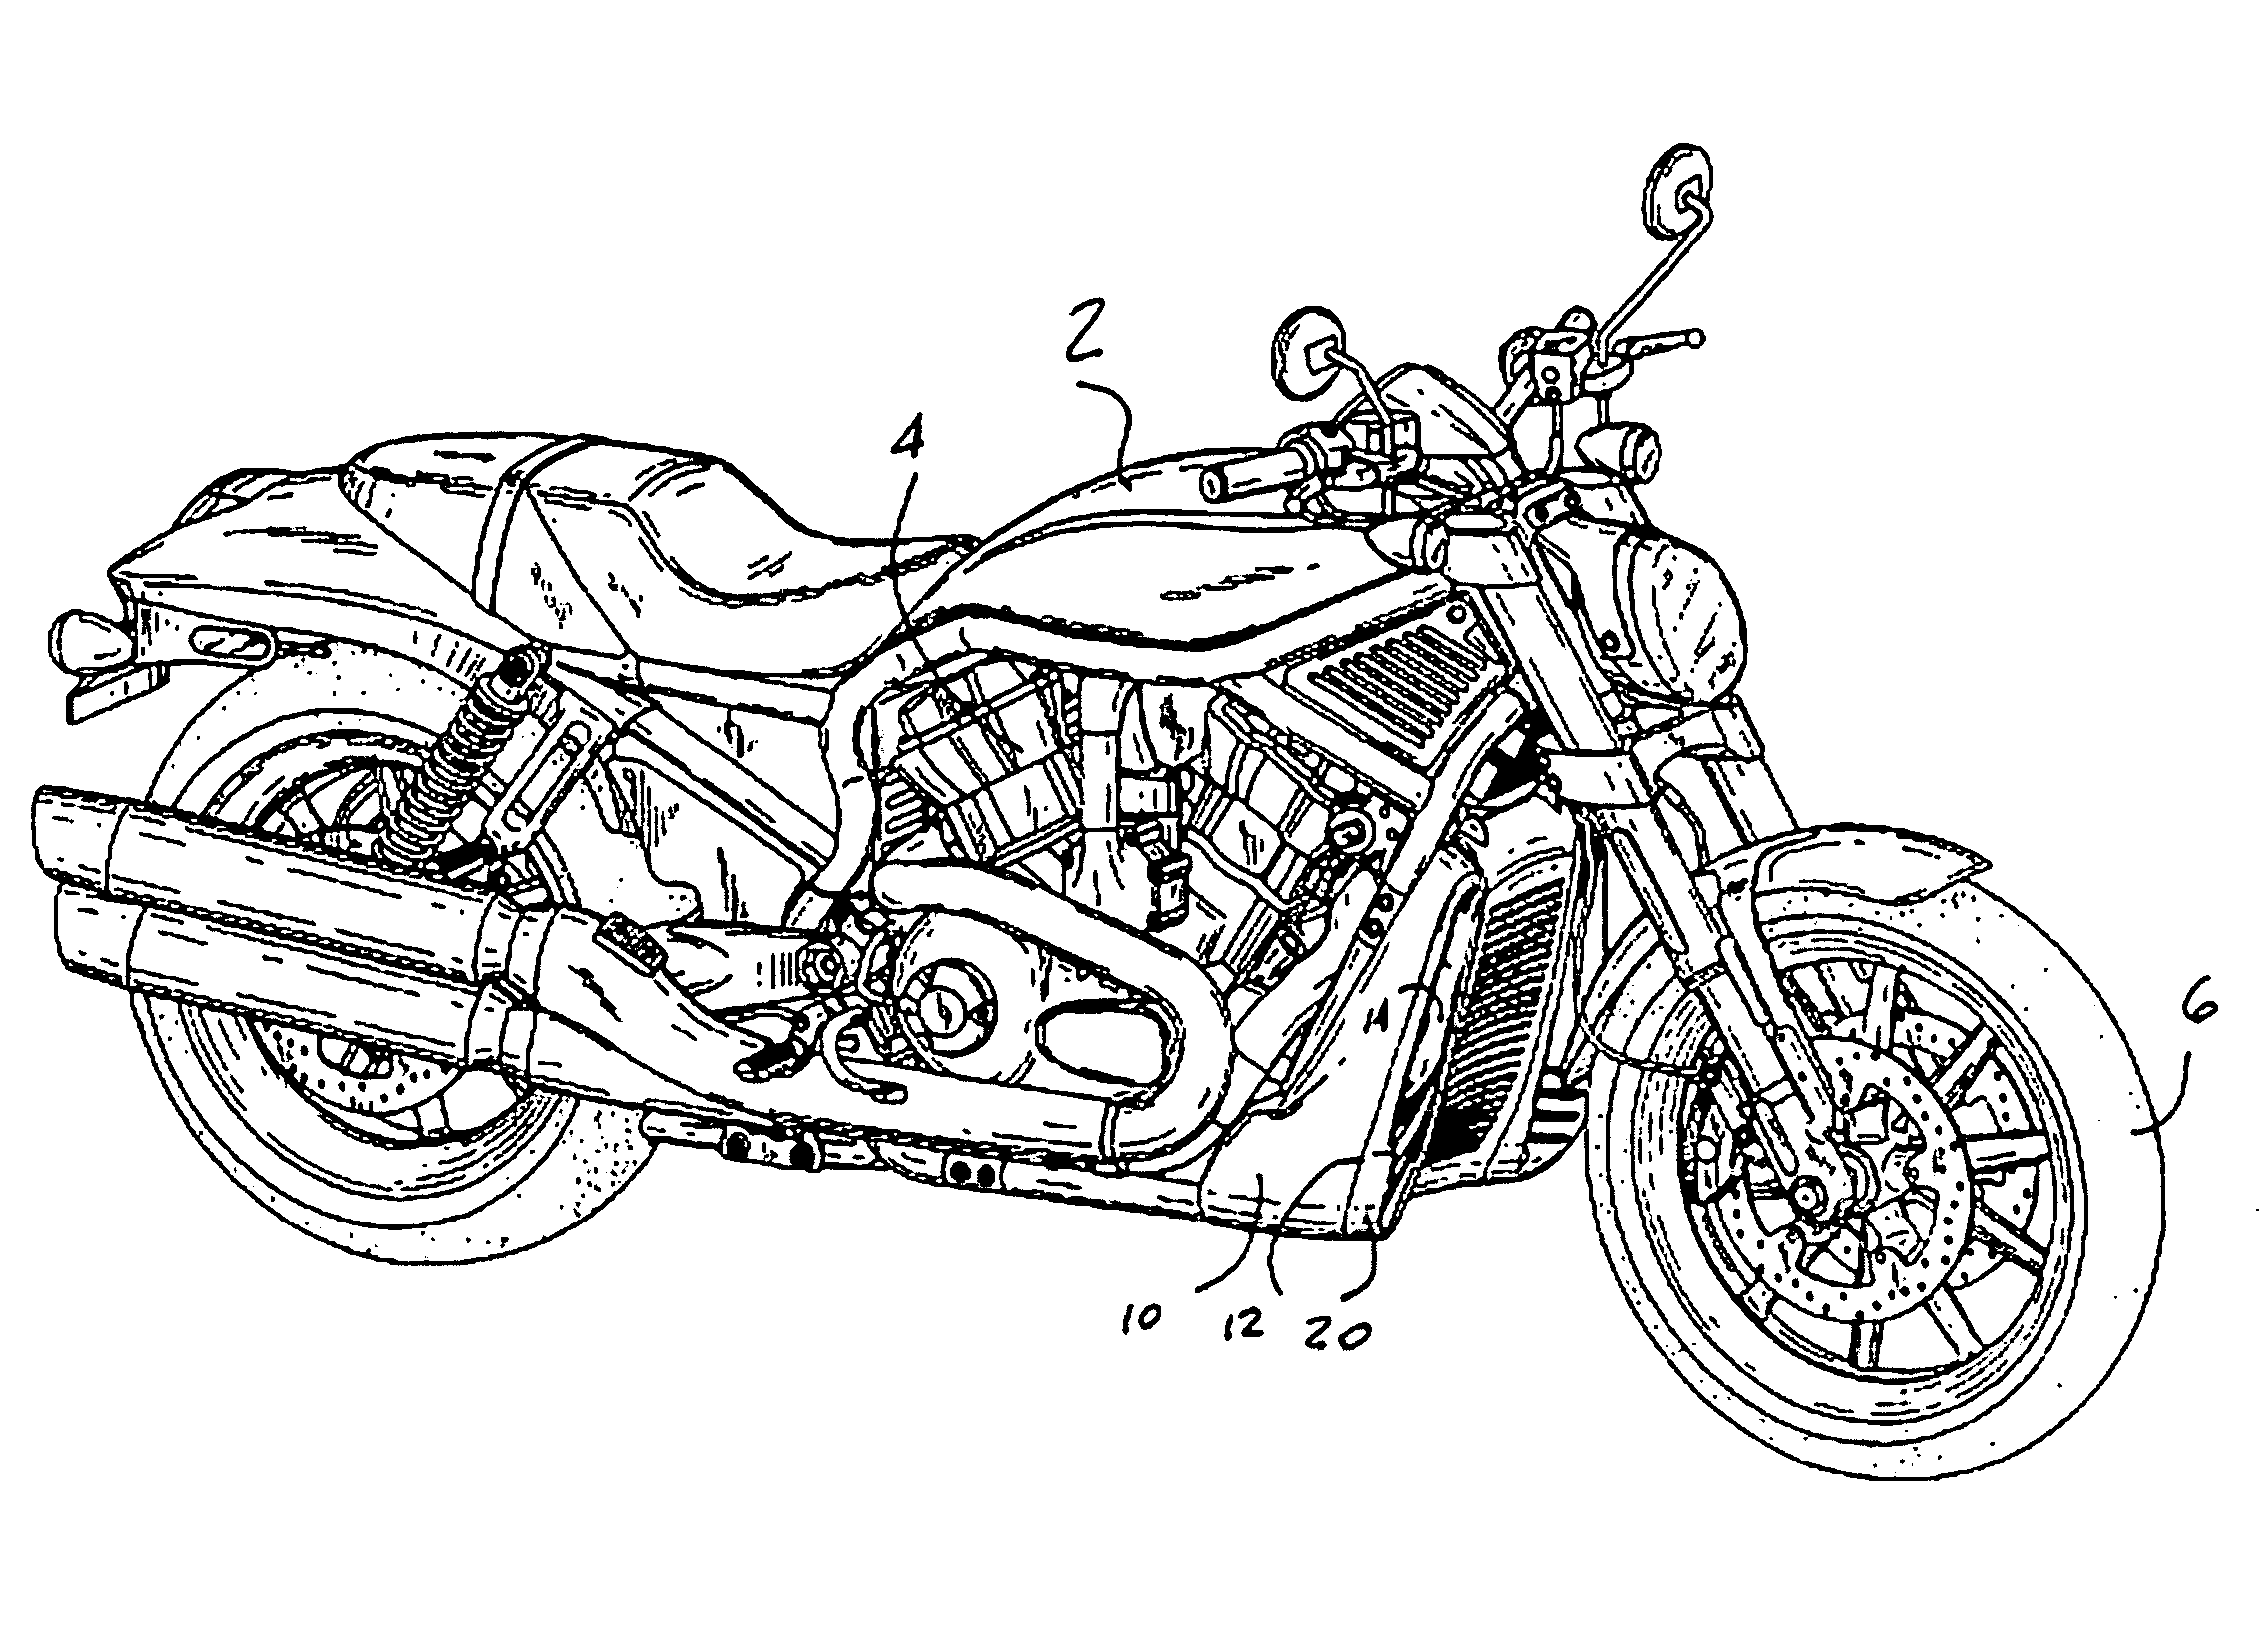 Grille for a motorcycle radiator cover